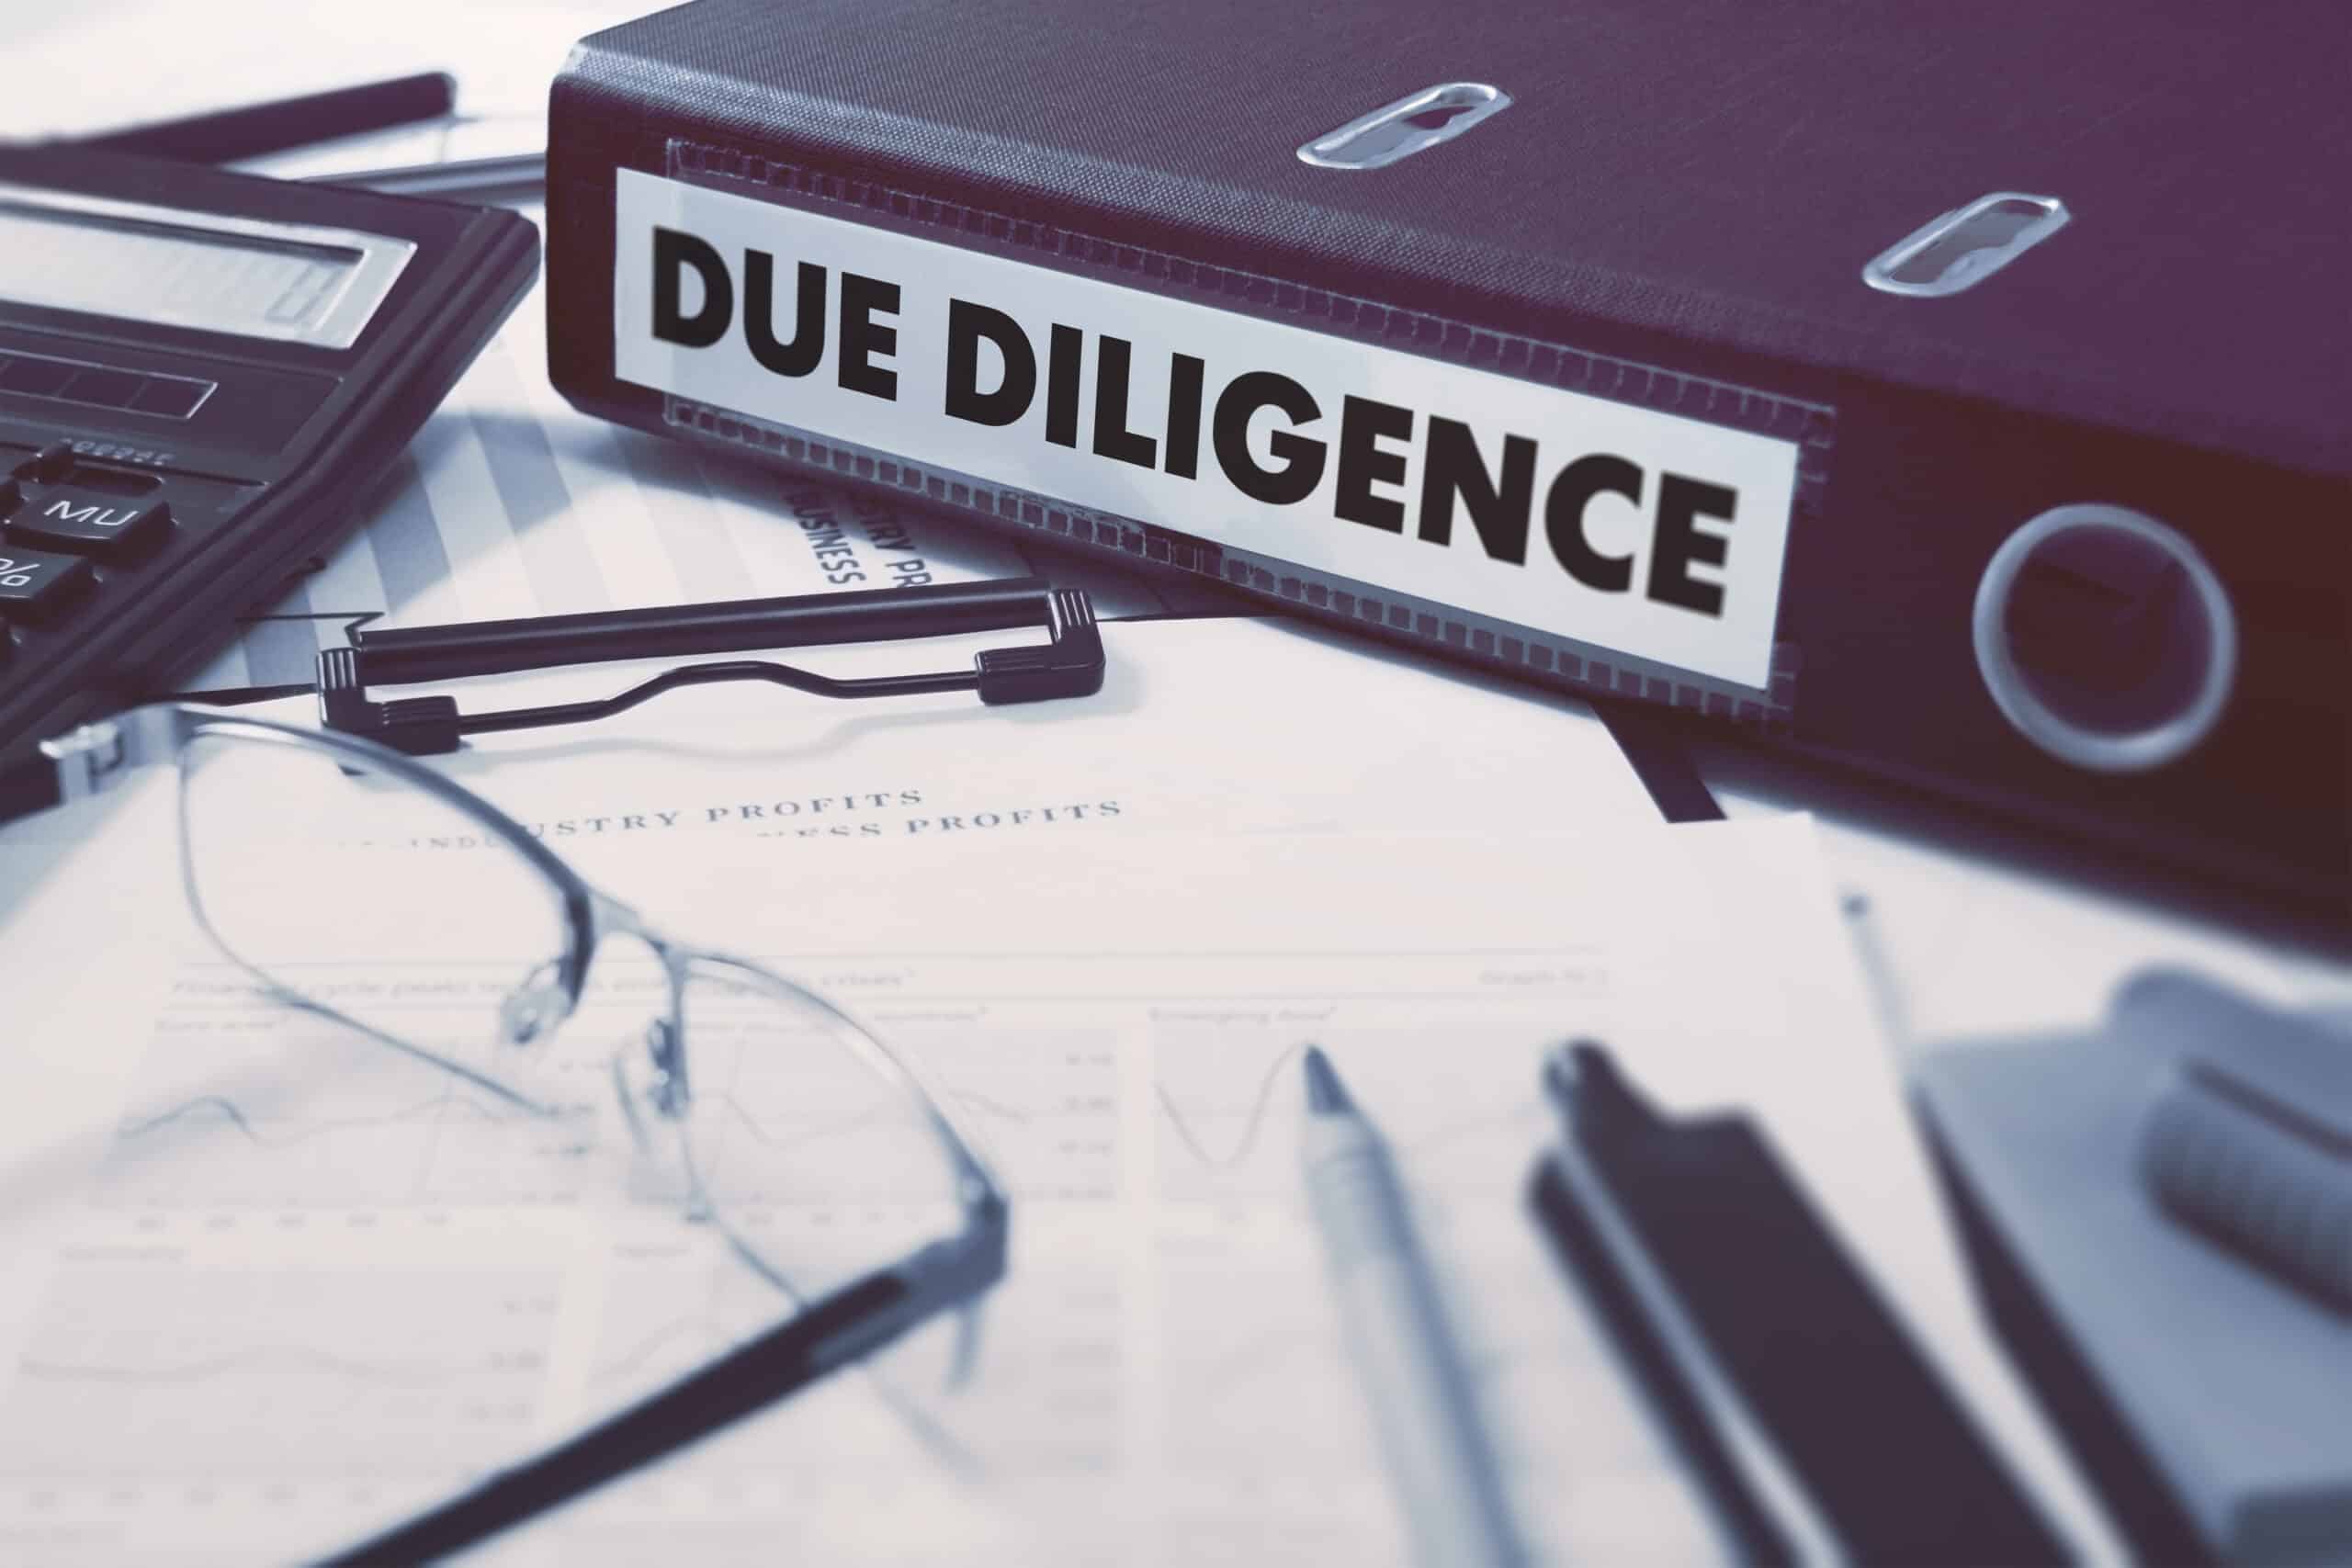 Due Diligence - Ring Binder on Office Desktop with Office Supplies